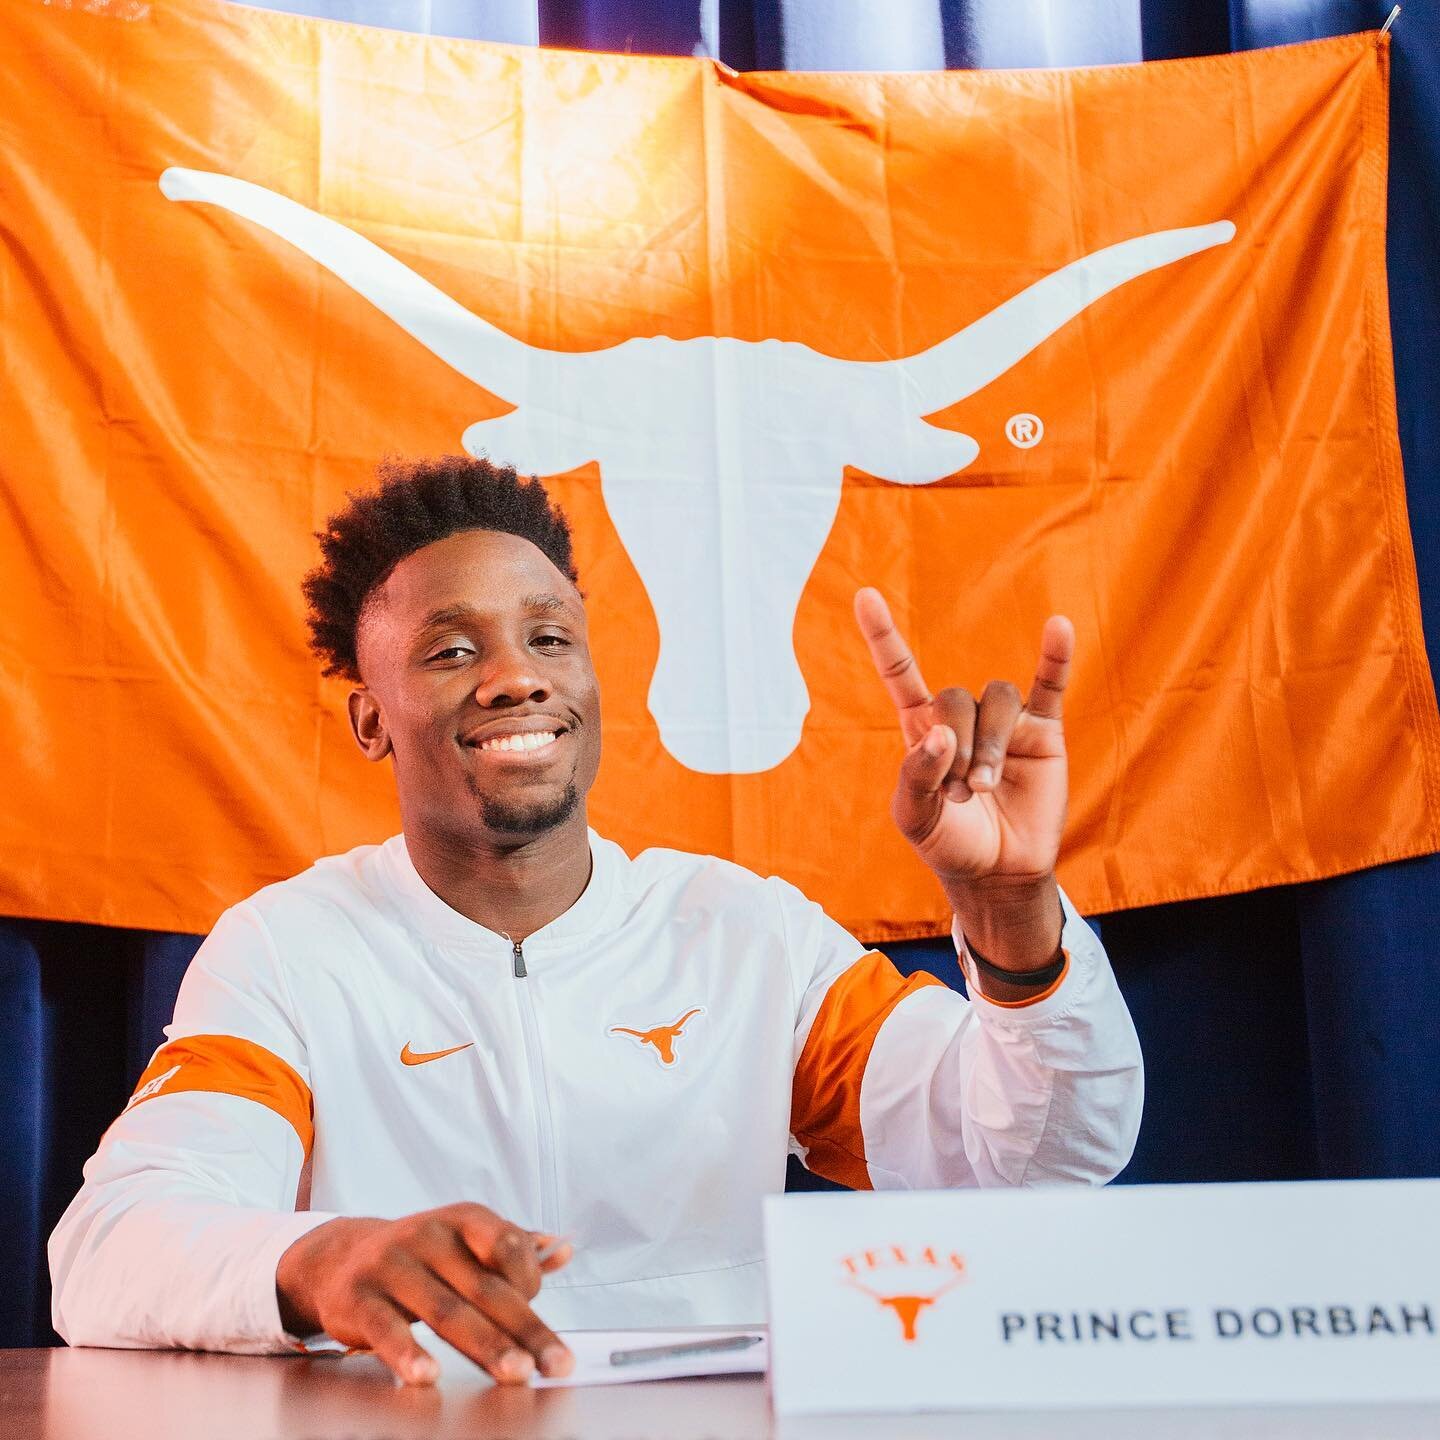 National Football Signing Day✨ @princedorbah is officially a @texaslonghorns 🤘 #HOOKEM so happy to have been a part of this journey can&rsquo;t wait for what&rsquo;s next 🏈 #teamdorbah